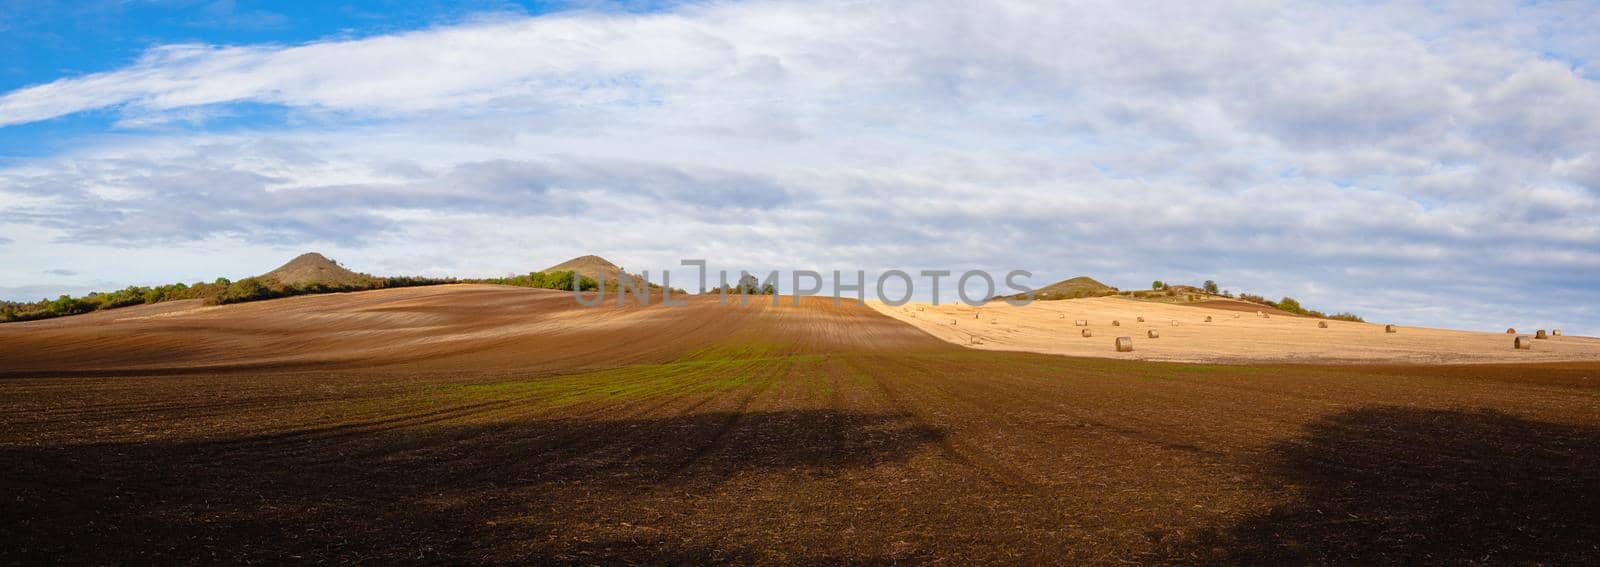 Bales of straw on a farm field

 by CaptureLight